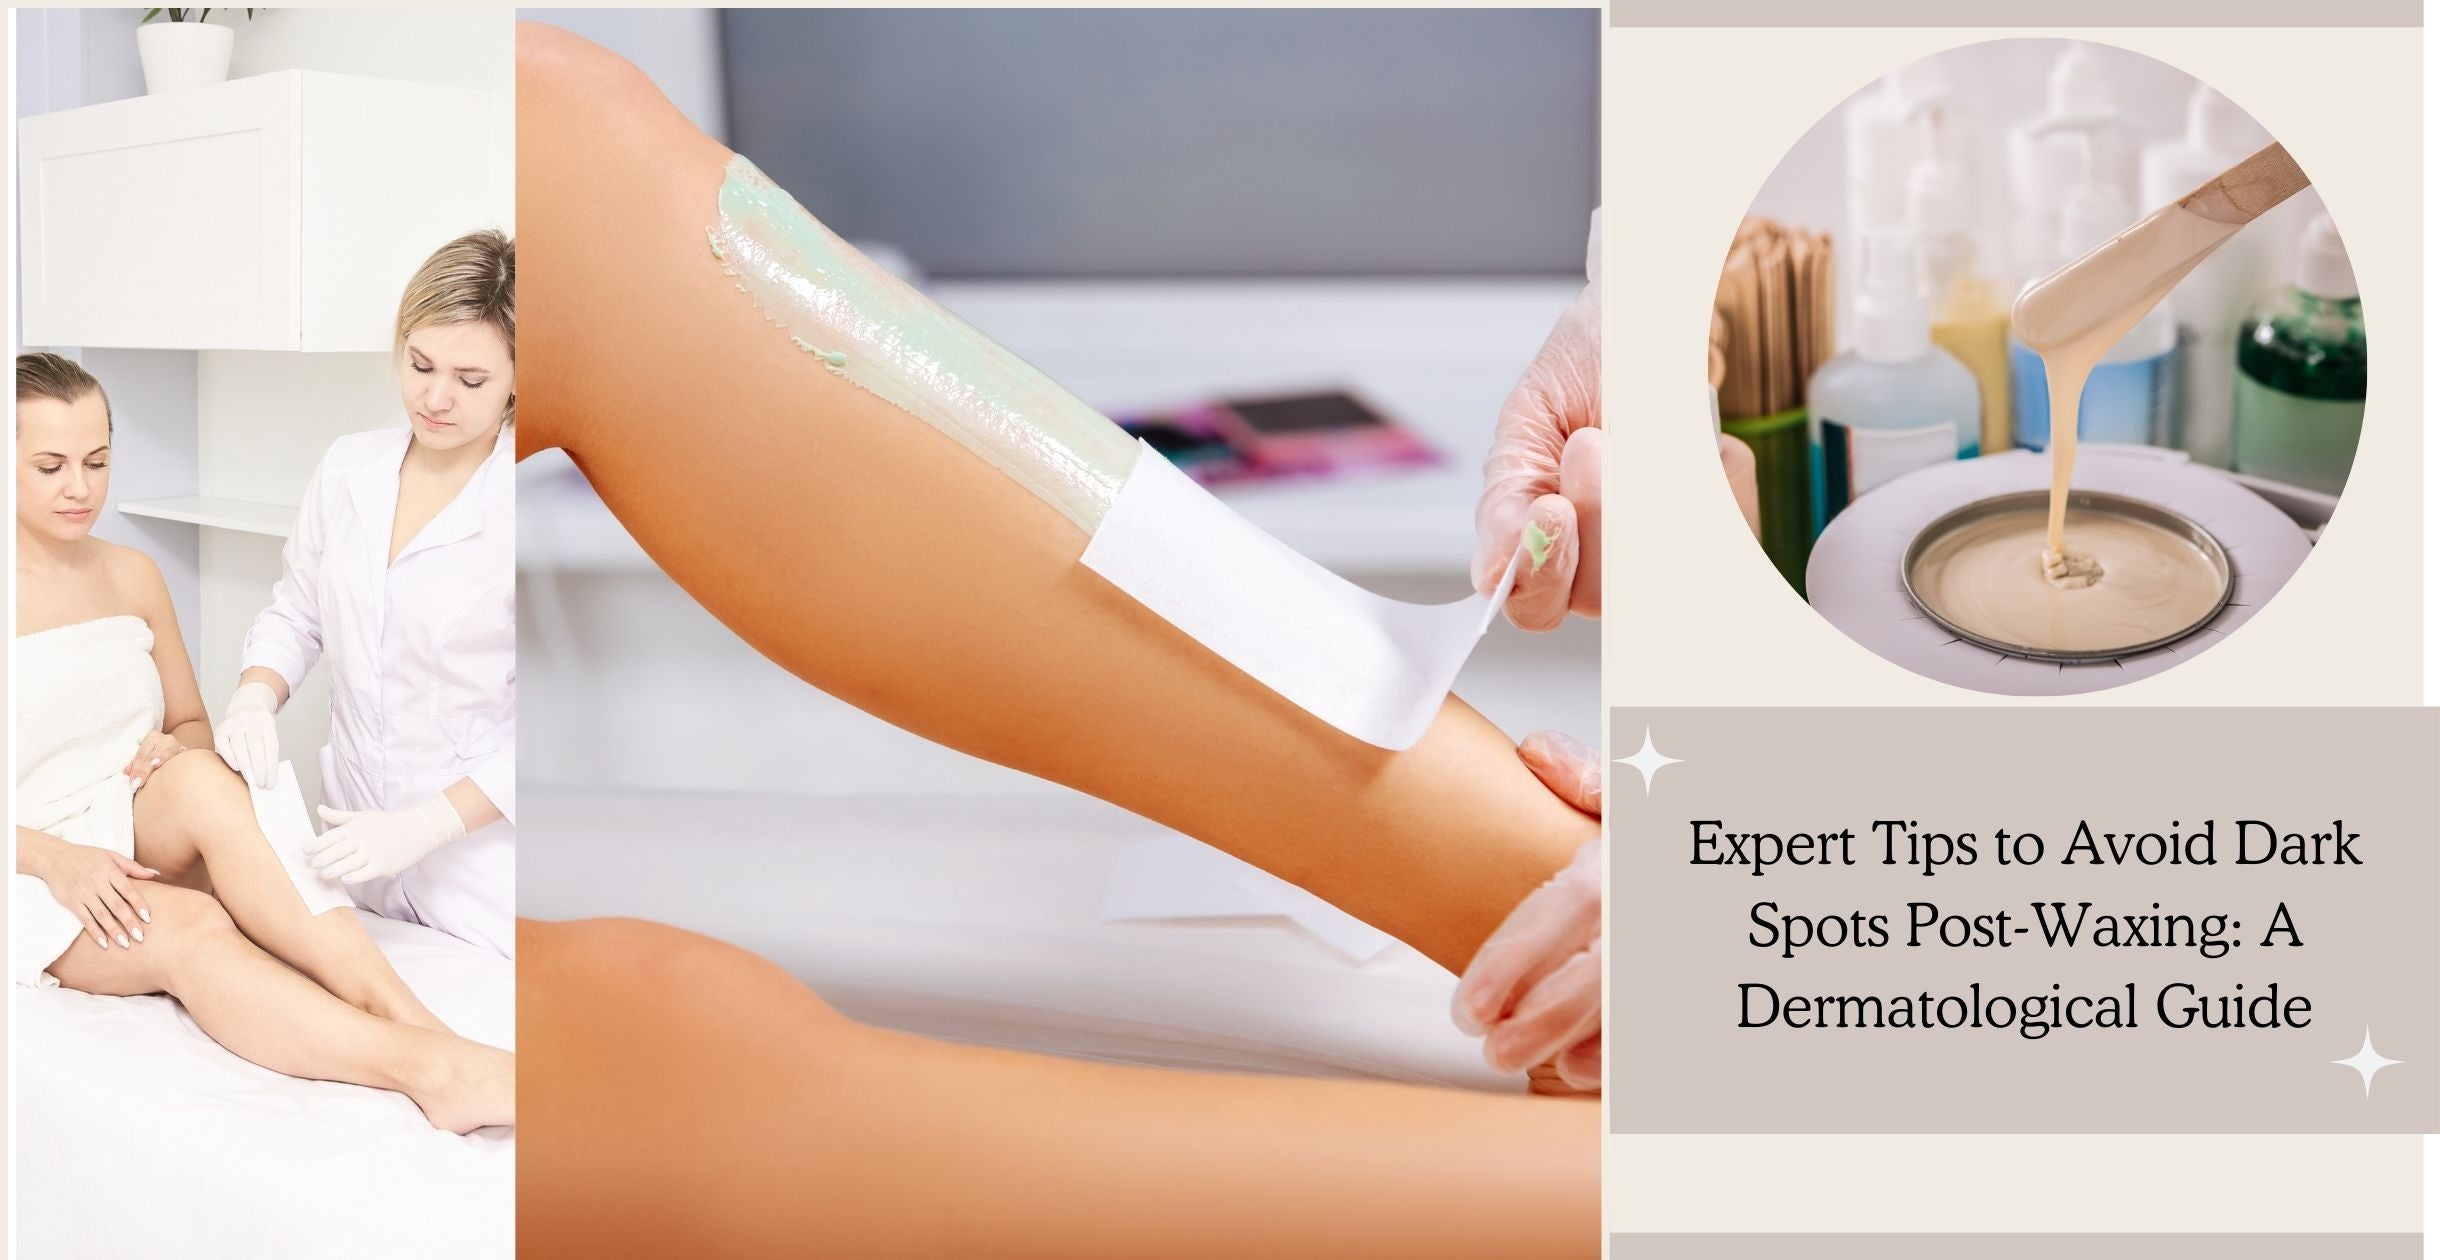 Expert Tips to Avoid Dark Spots Post-Waxing: A Dermatological Guide